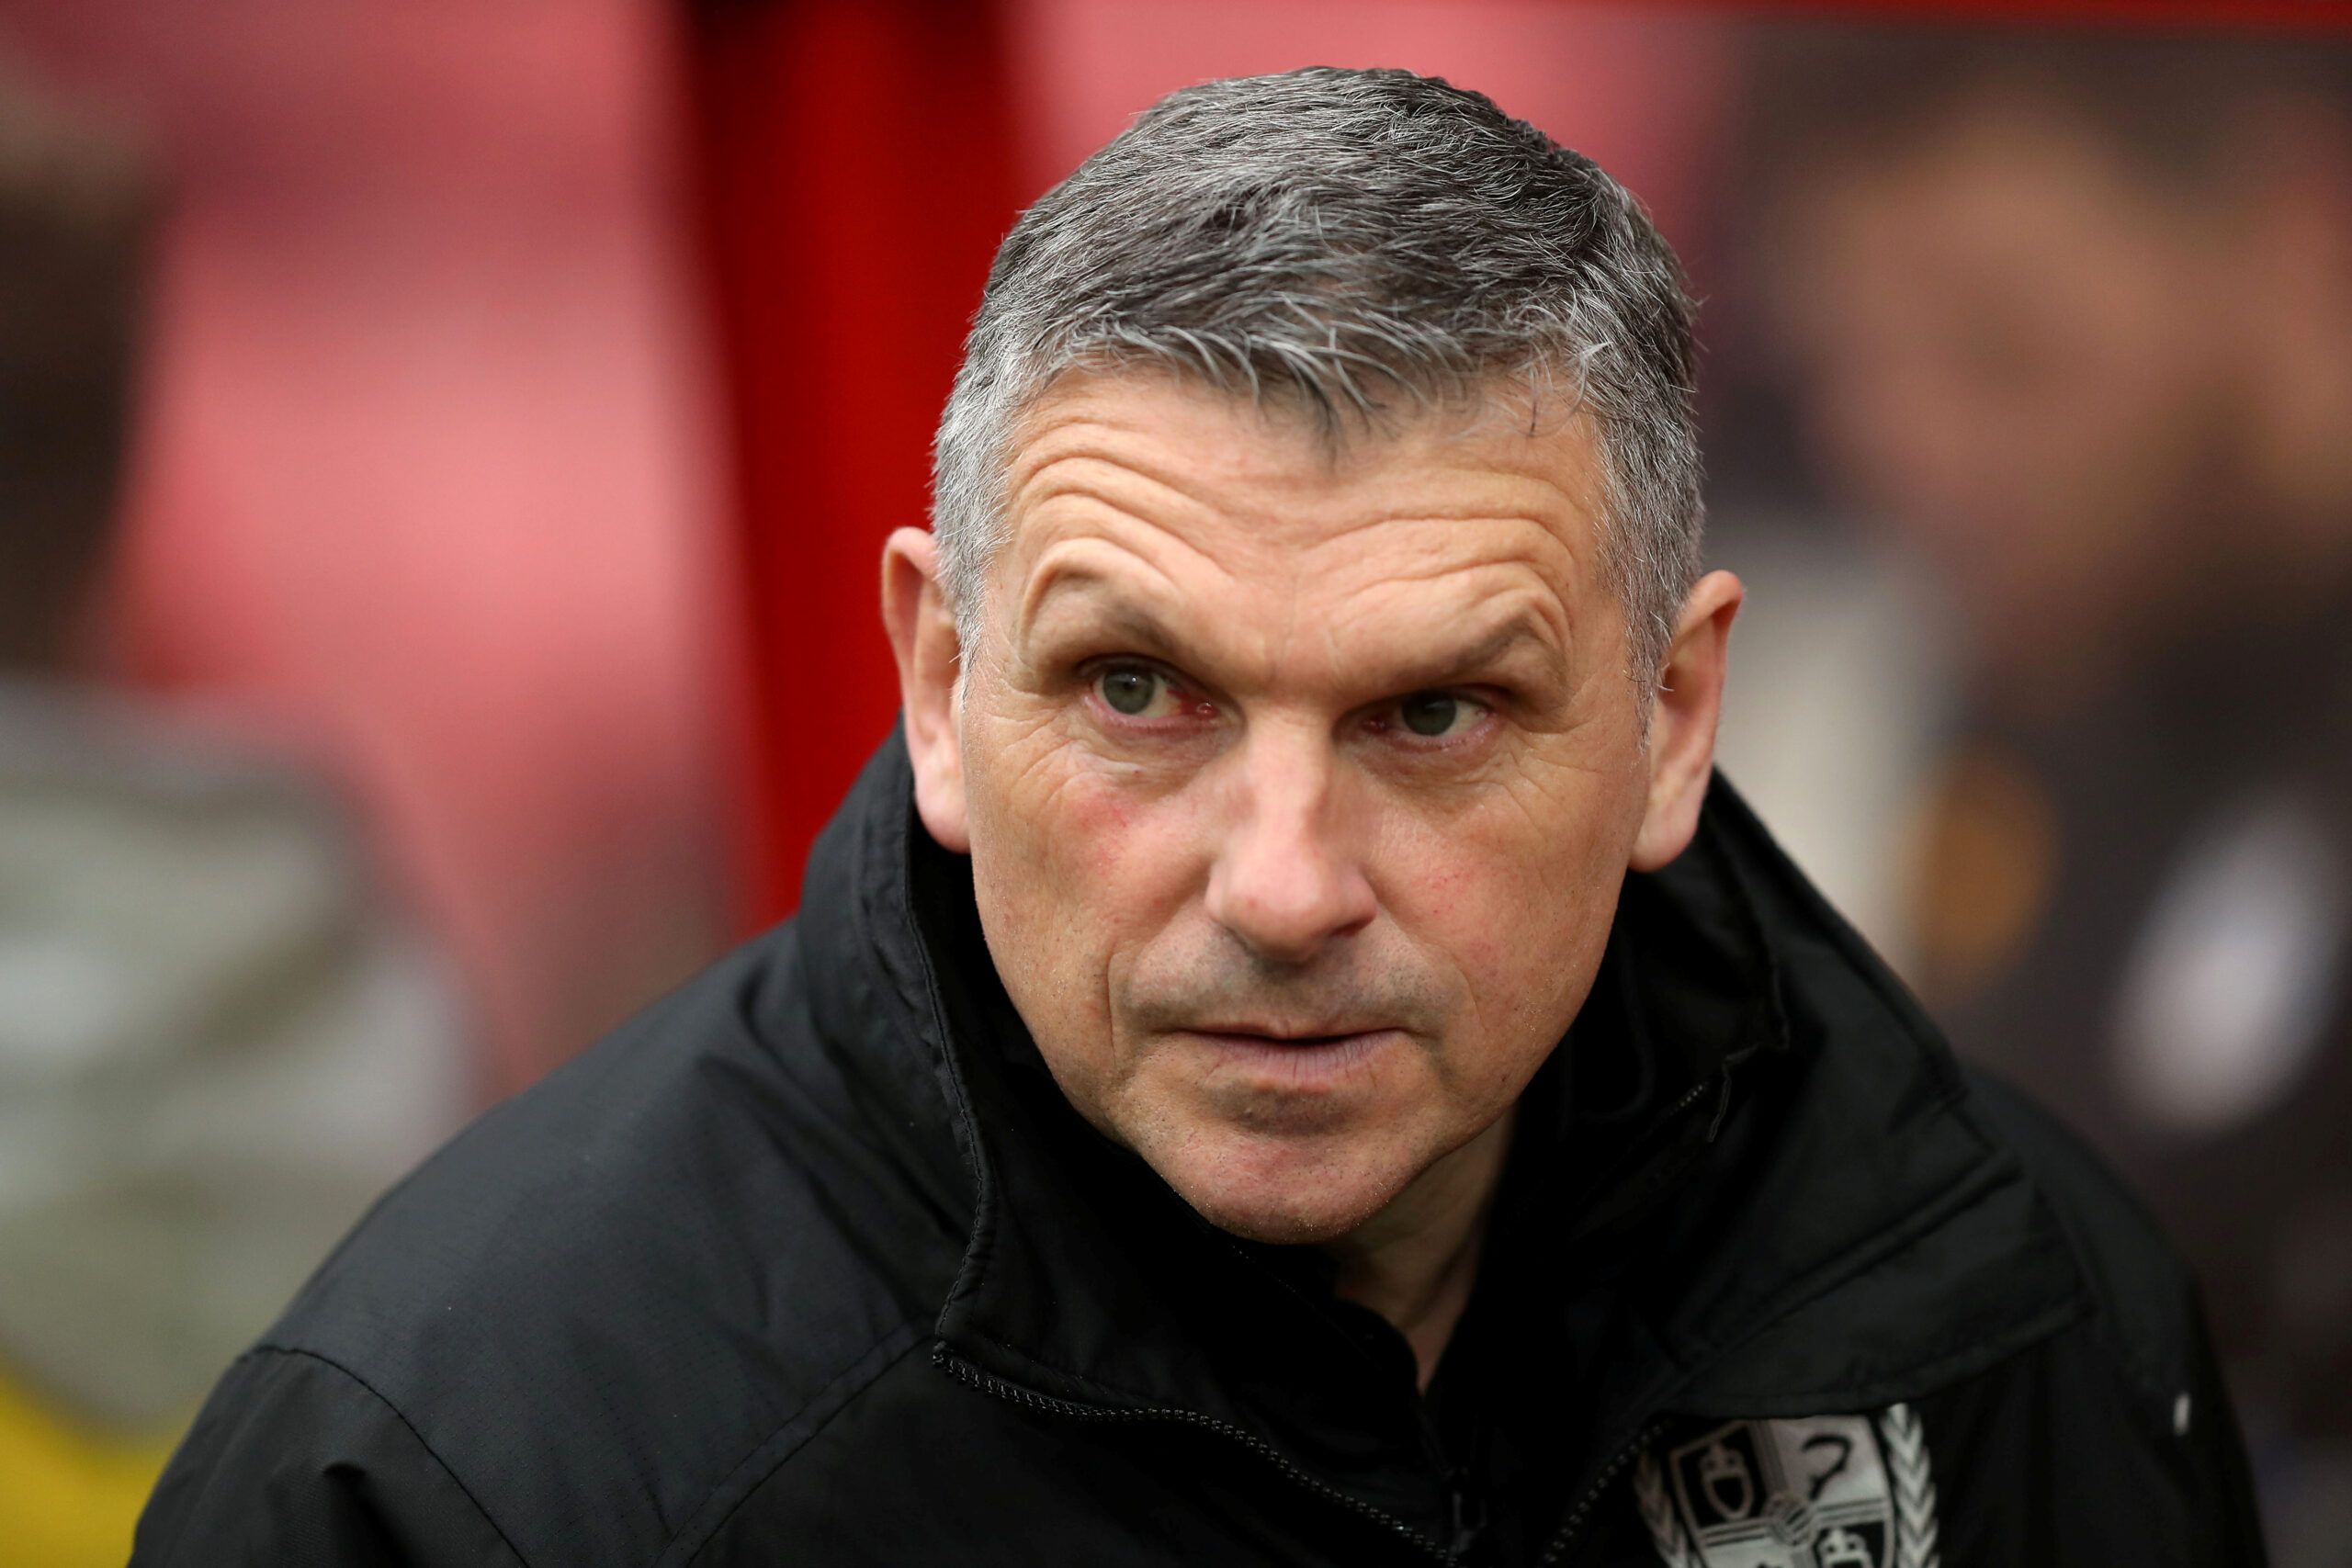 Soccer Football - League Two - Swindon Town v Port Vale - The County Ground, Swindon, Britain - January 25, 2020   Port Vale's manager John Askey     Action Images/John Clifton    EDITORIAL USE ONLY. No use with unauthorized audio, video, data, fixture lists, club/league logos or 